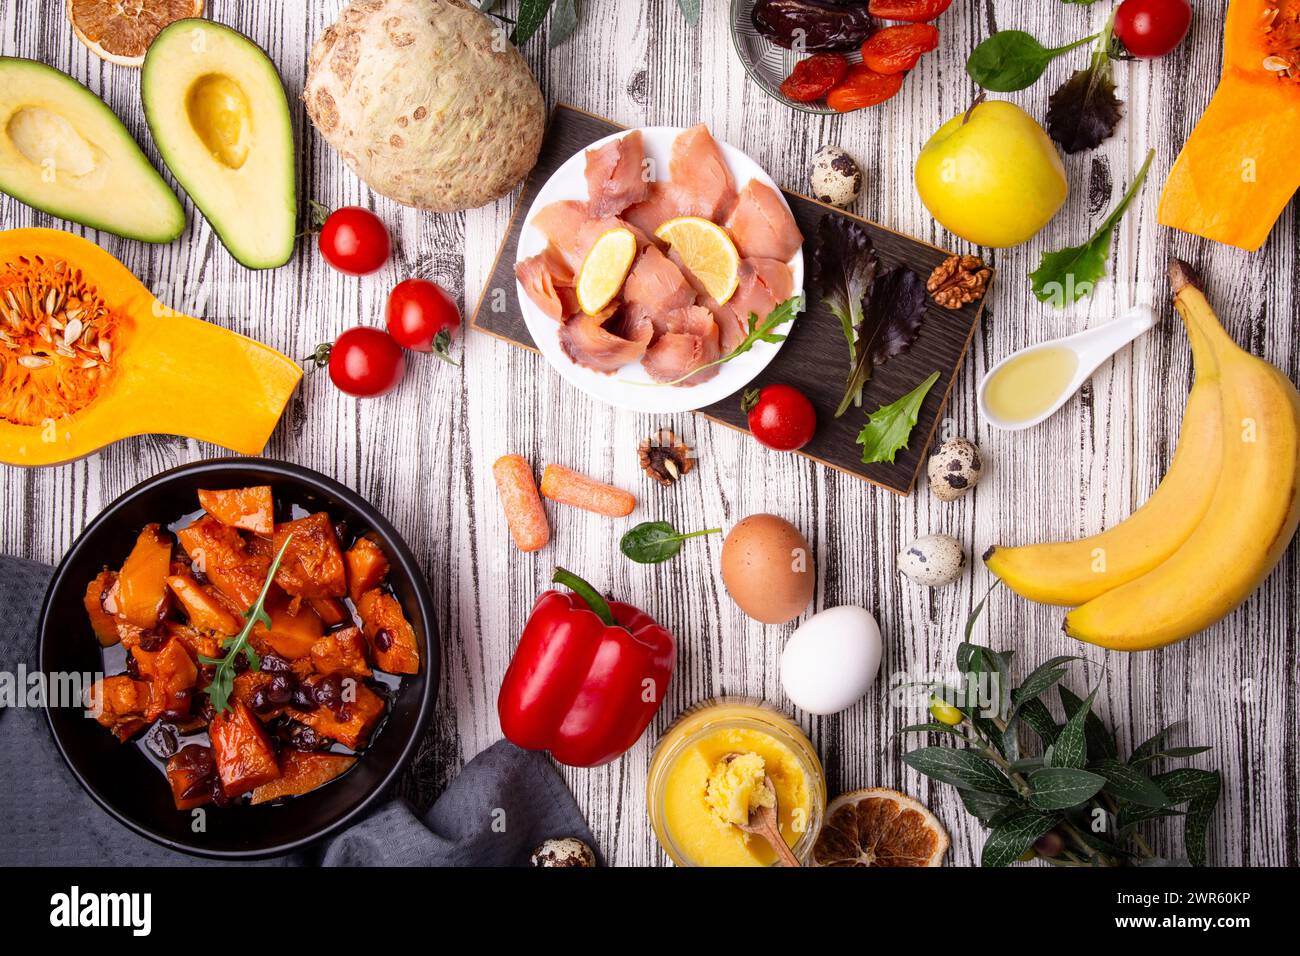 Fresh vegetables, fruits and proteins for a healthy lifestyle. Mediterranean diet, Paleo, Keto. Stock Photo